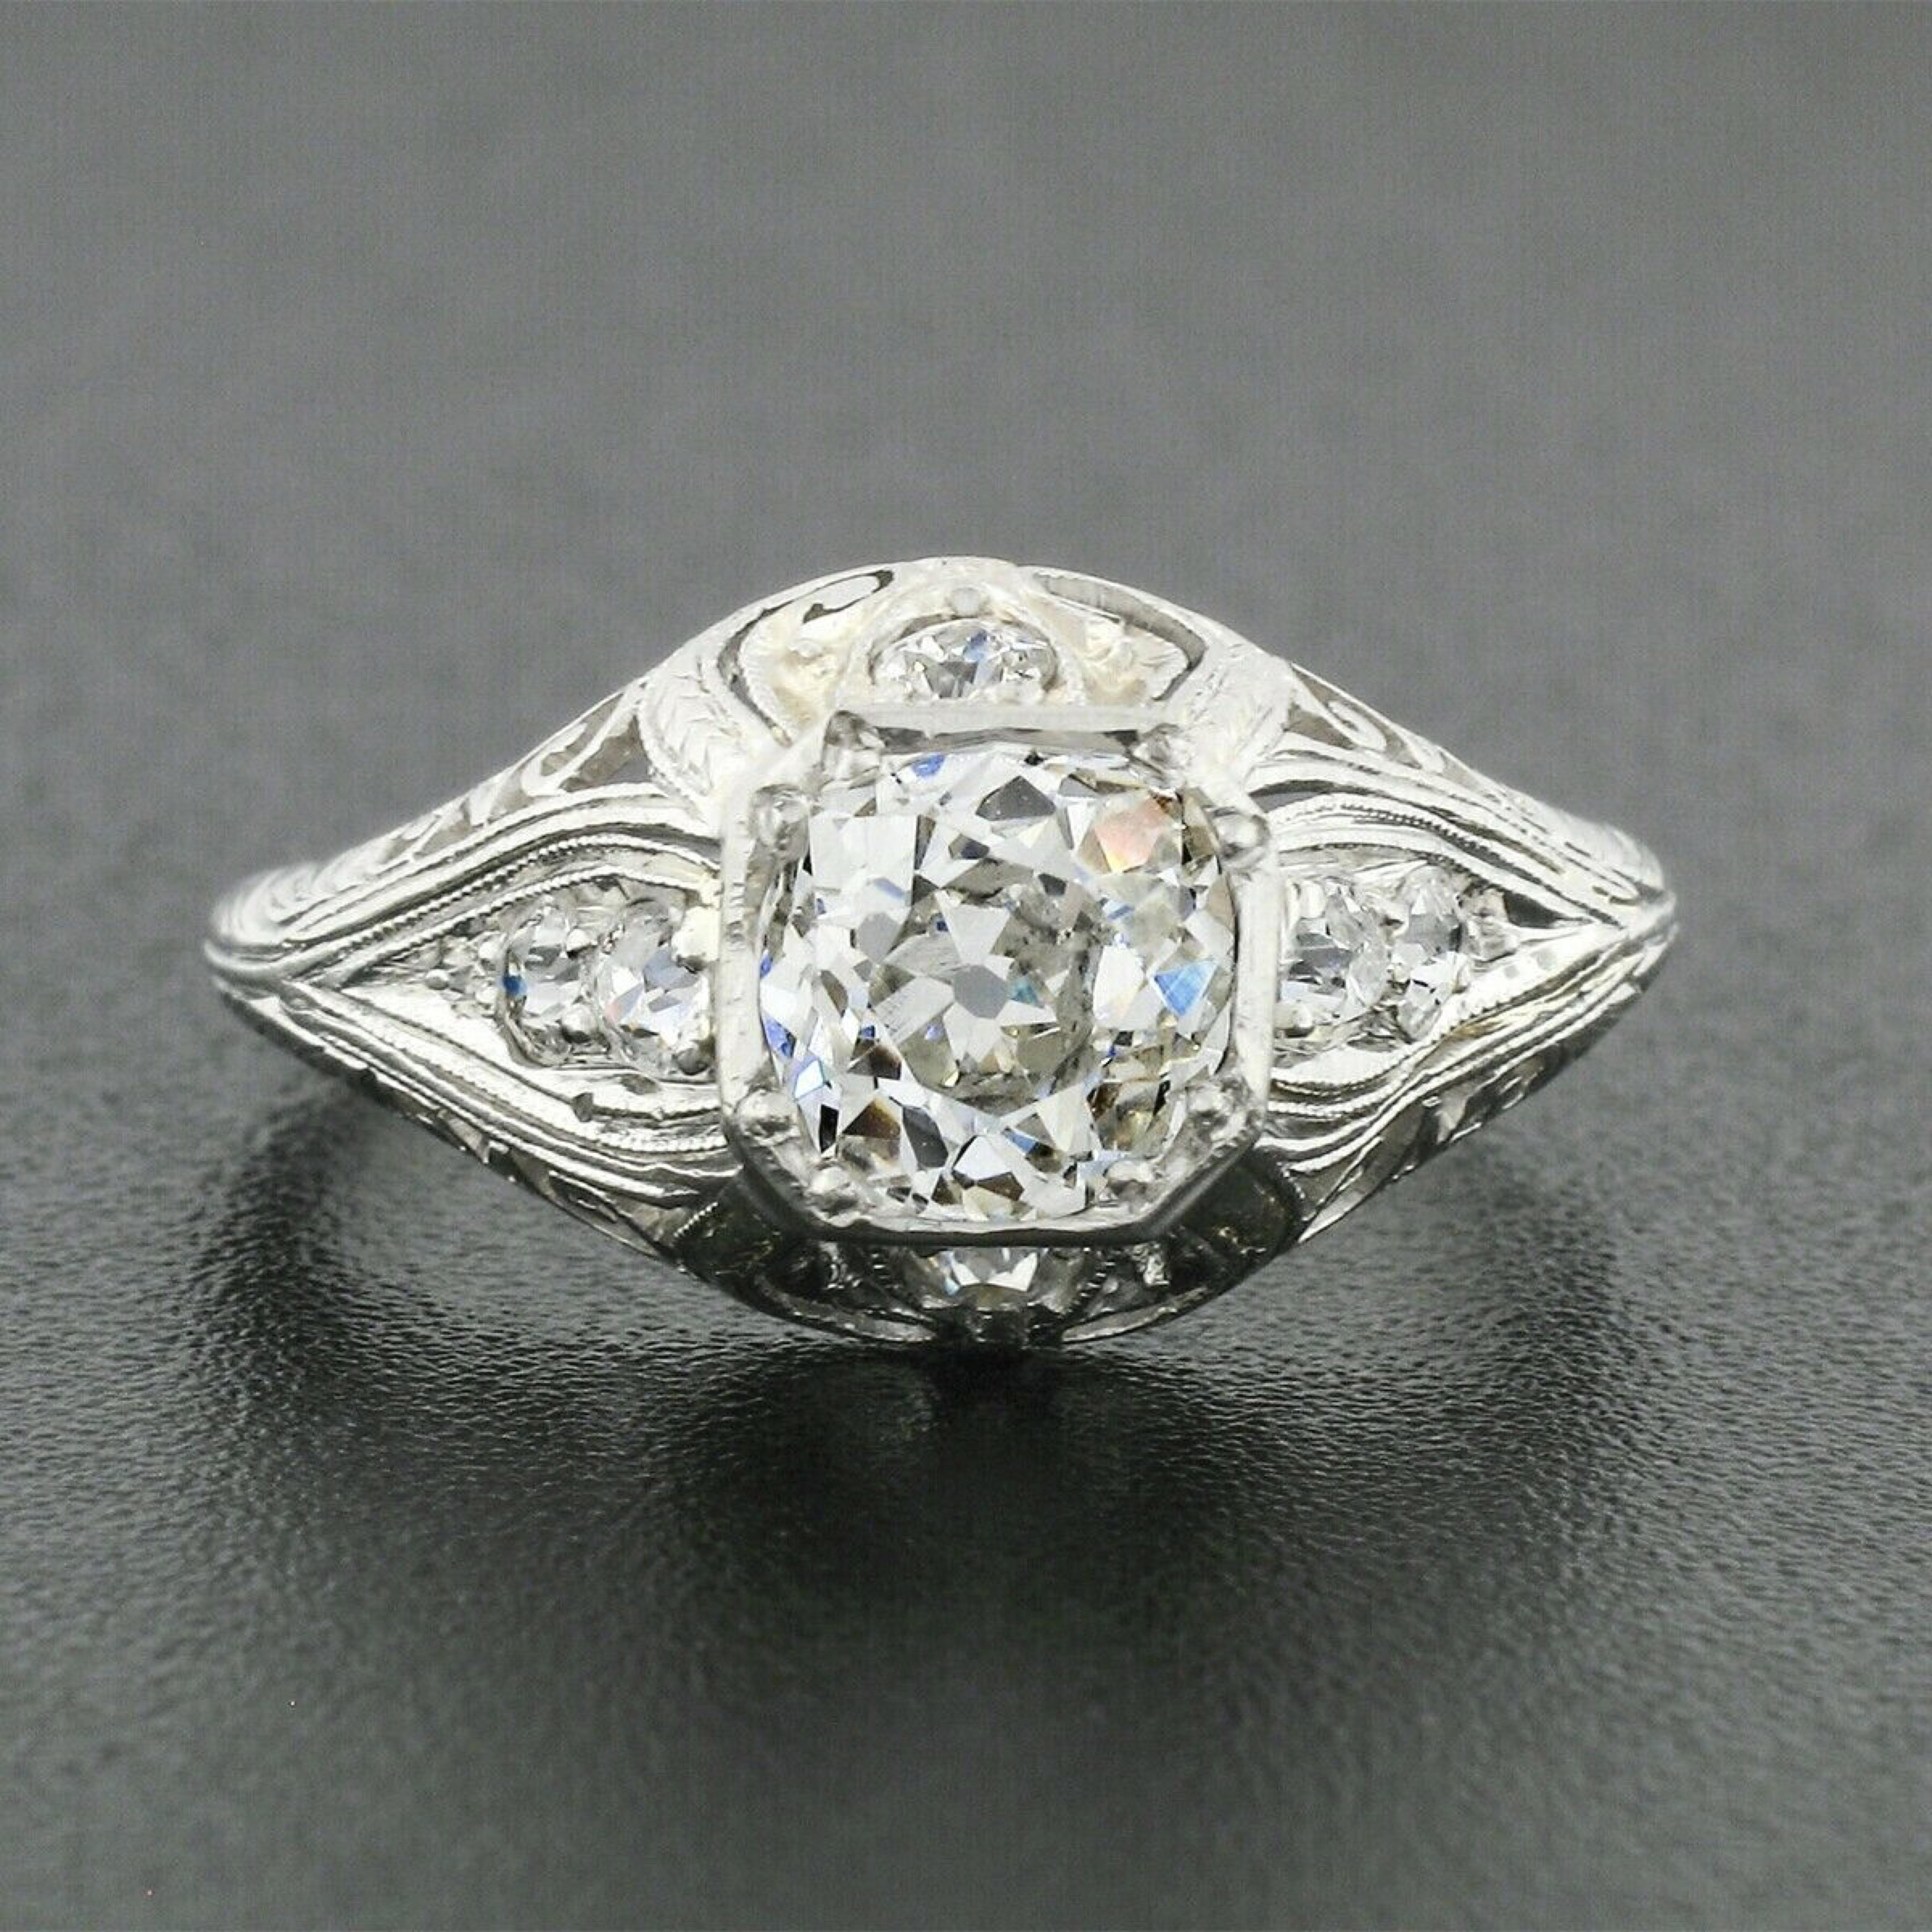 This incredible antique diamond engagement ring from the belle époque period features the finest and most beautiful milgrain etching technique, hand engraving and filigree designs that all remain intact and in perfect condition. The ring features an